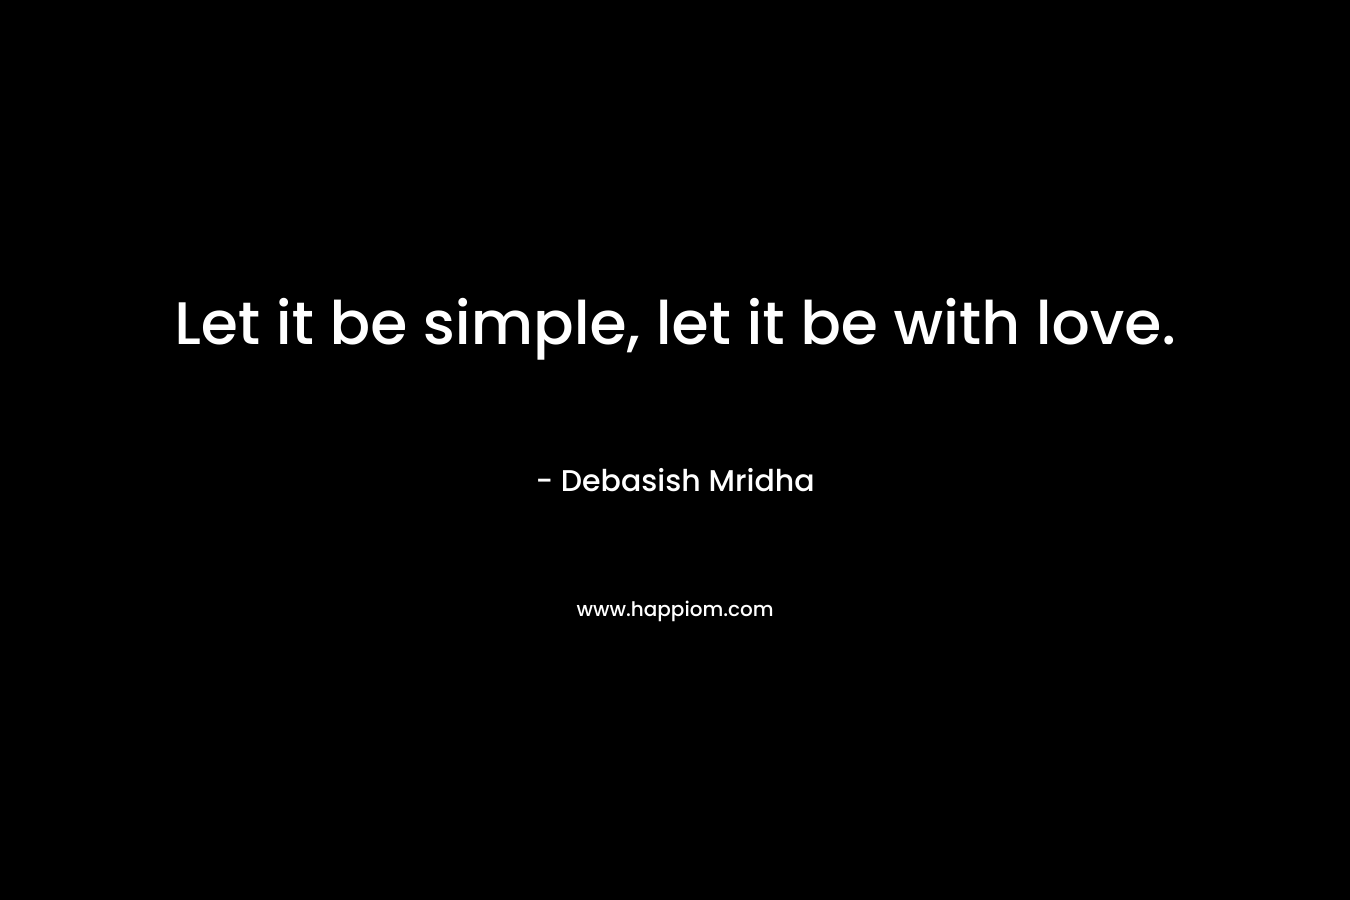 Let it be simple, let it be with love.